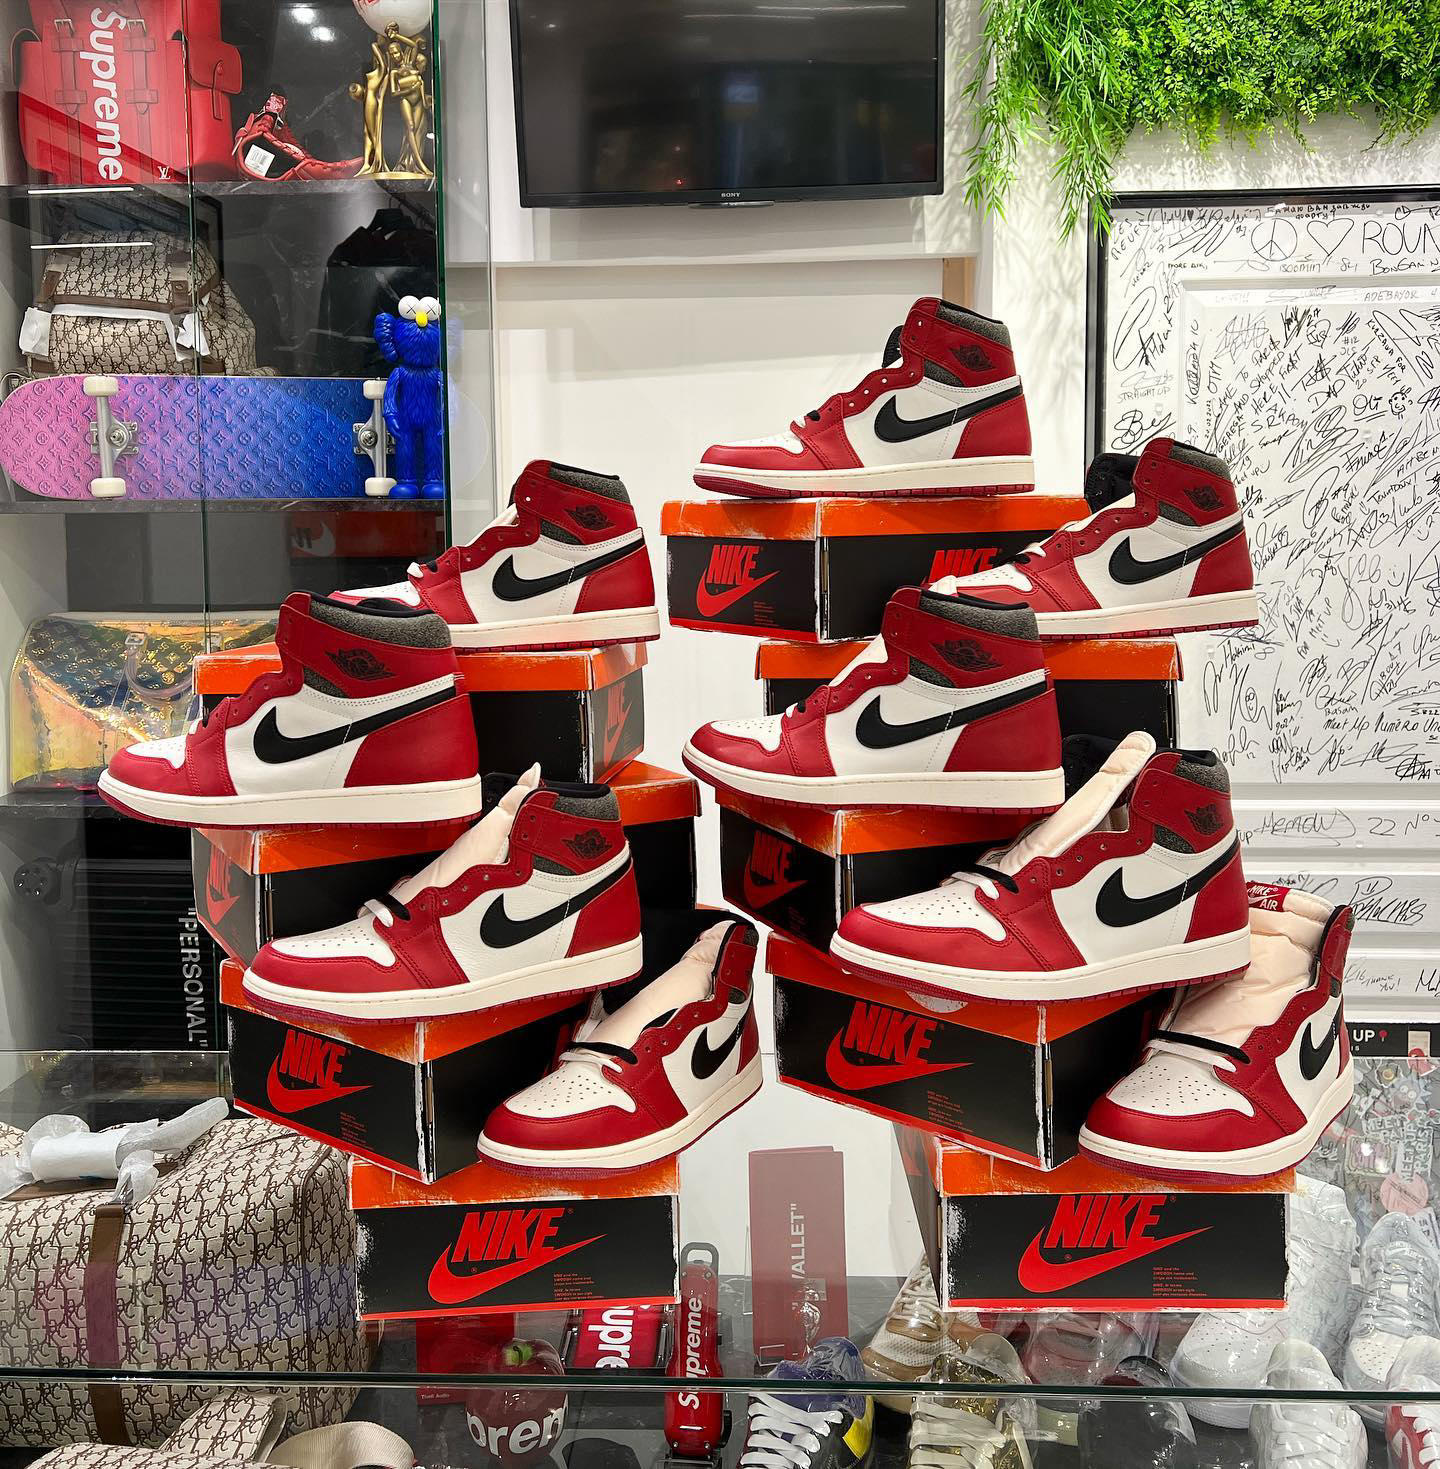 Sneakers & Clothes - Jordan 1 Chicago Lost